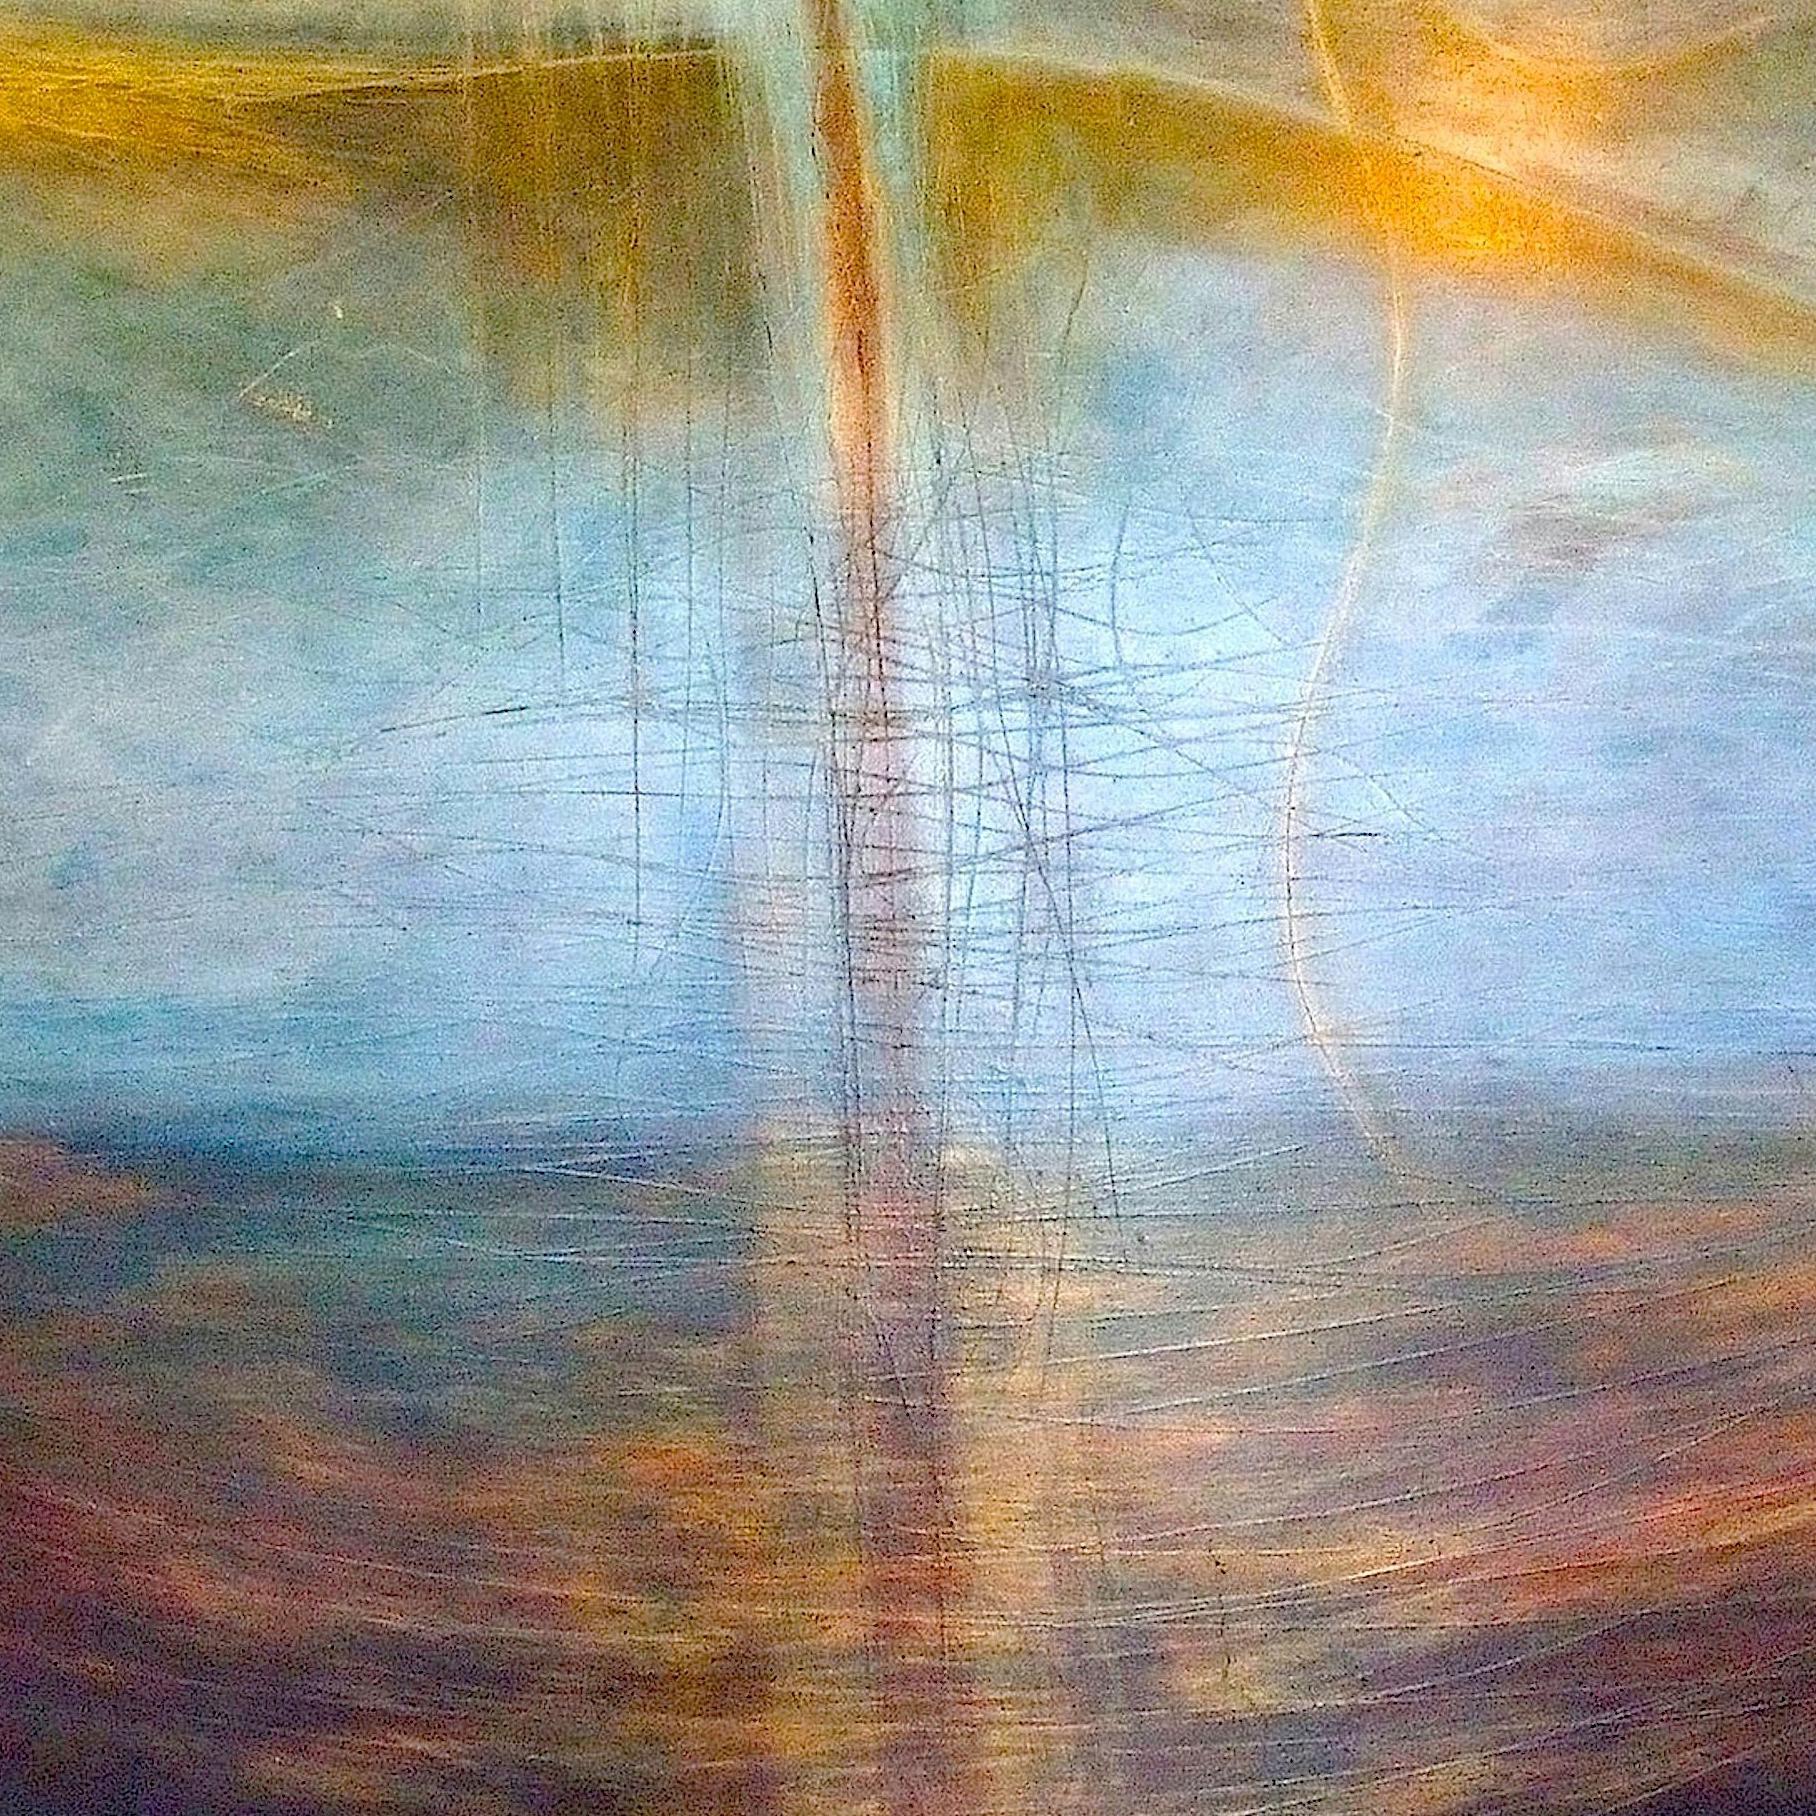 Lark Ascending - Abstract Expressionist Painting by Patricia McParlin